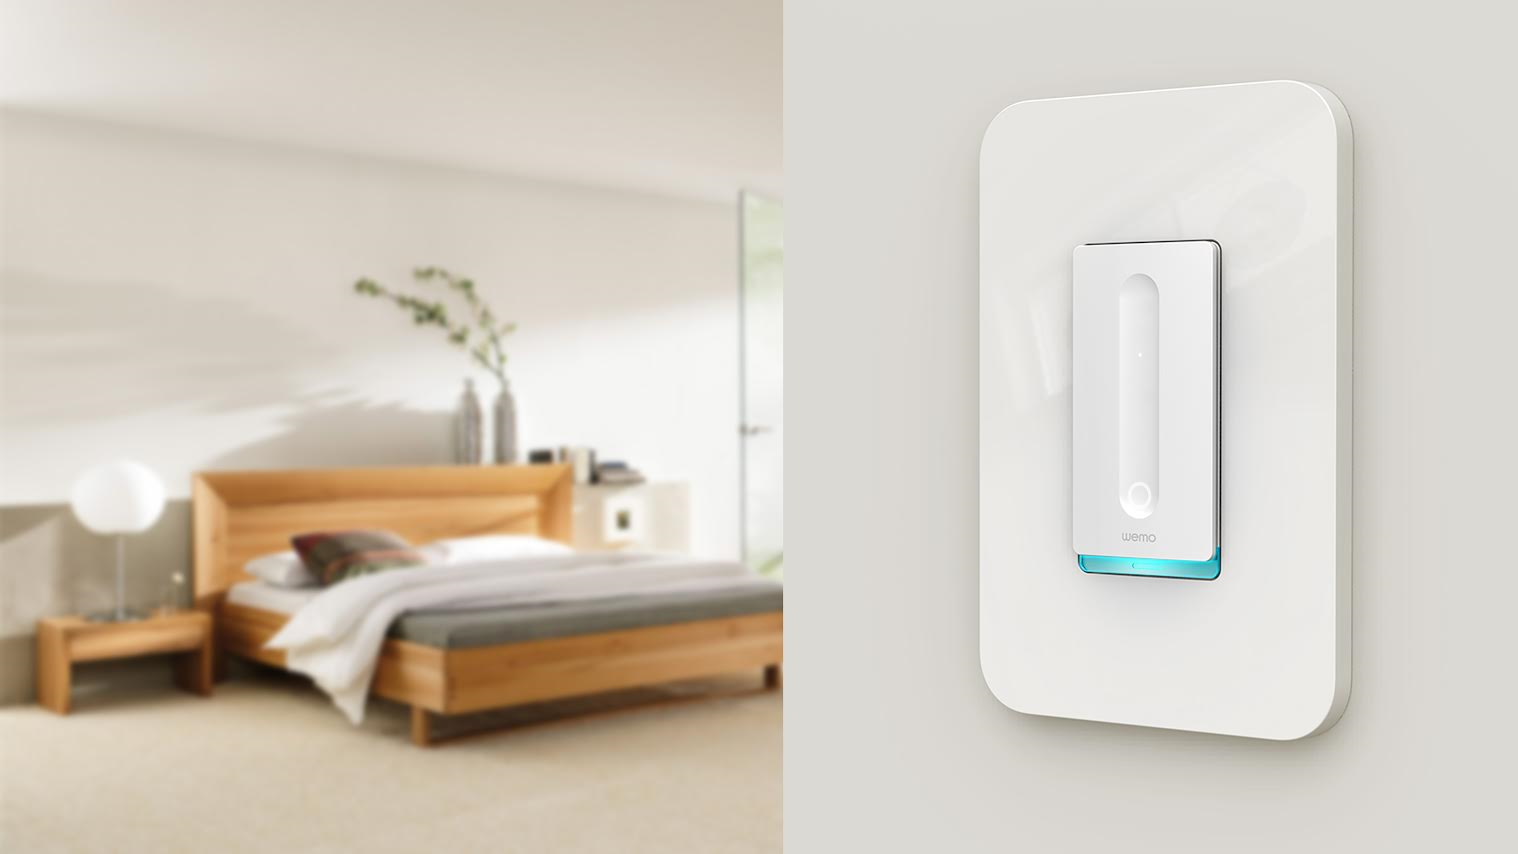 Get More Control Over Your Connected Home With The Wemo